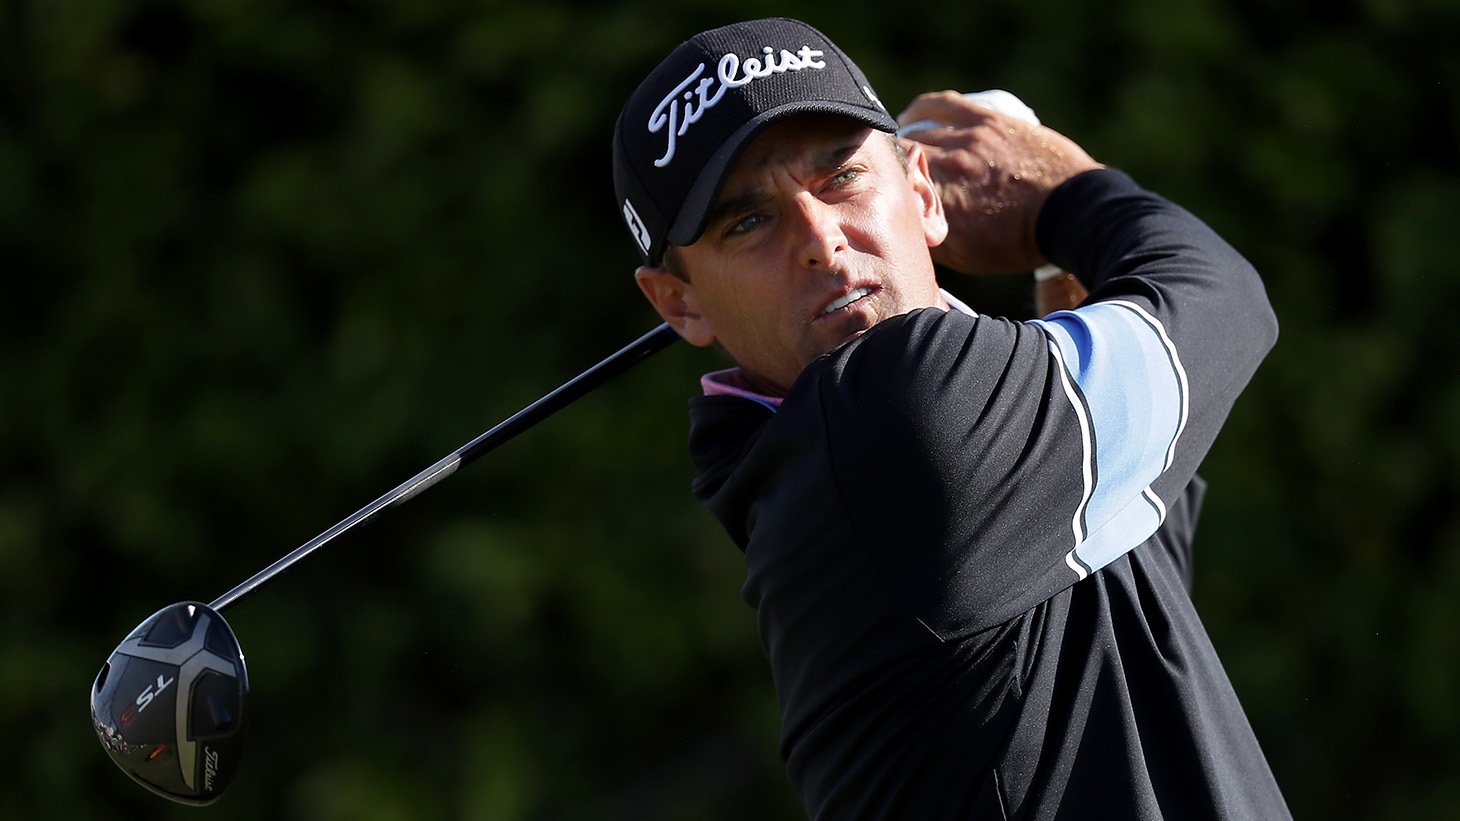 Charles Howell III tees off with the Titleist TS3 driver